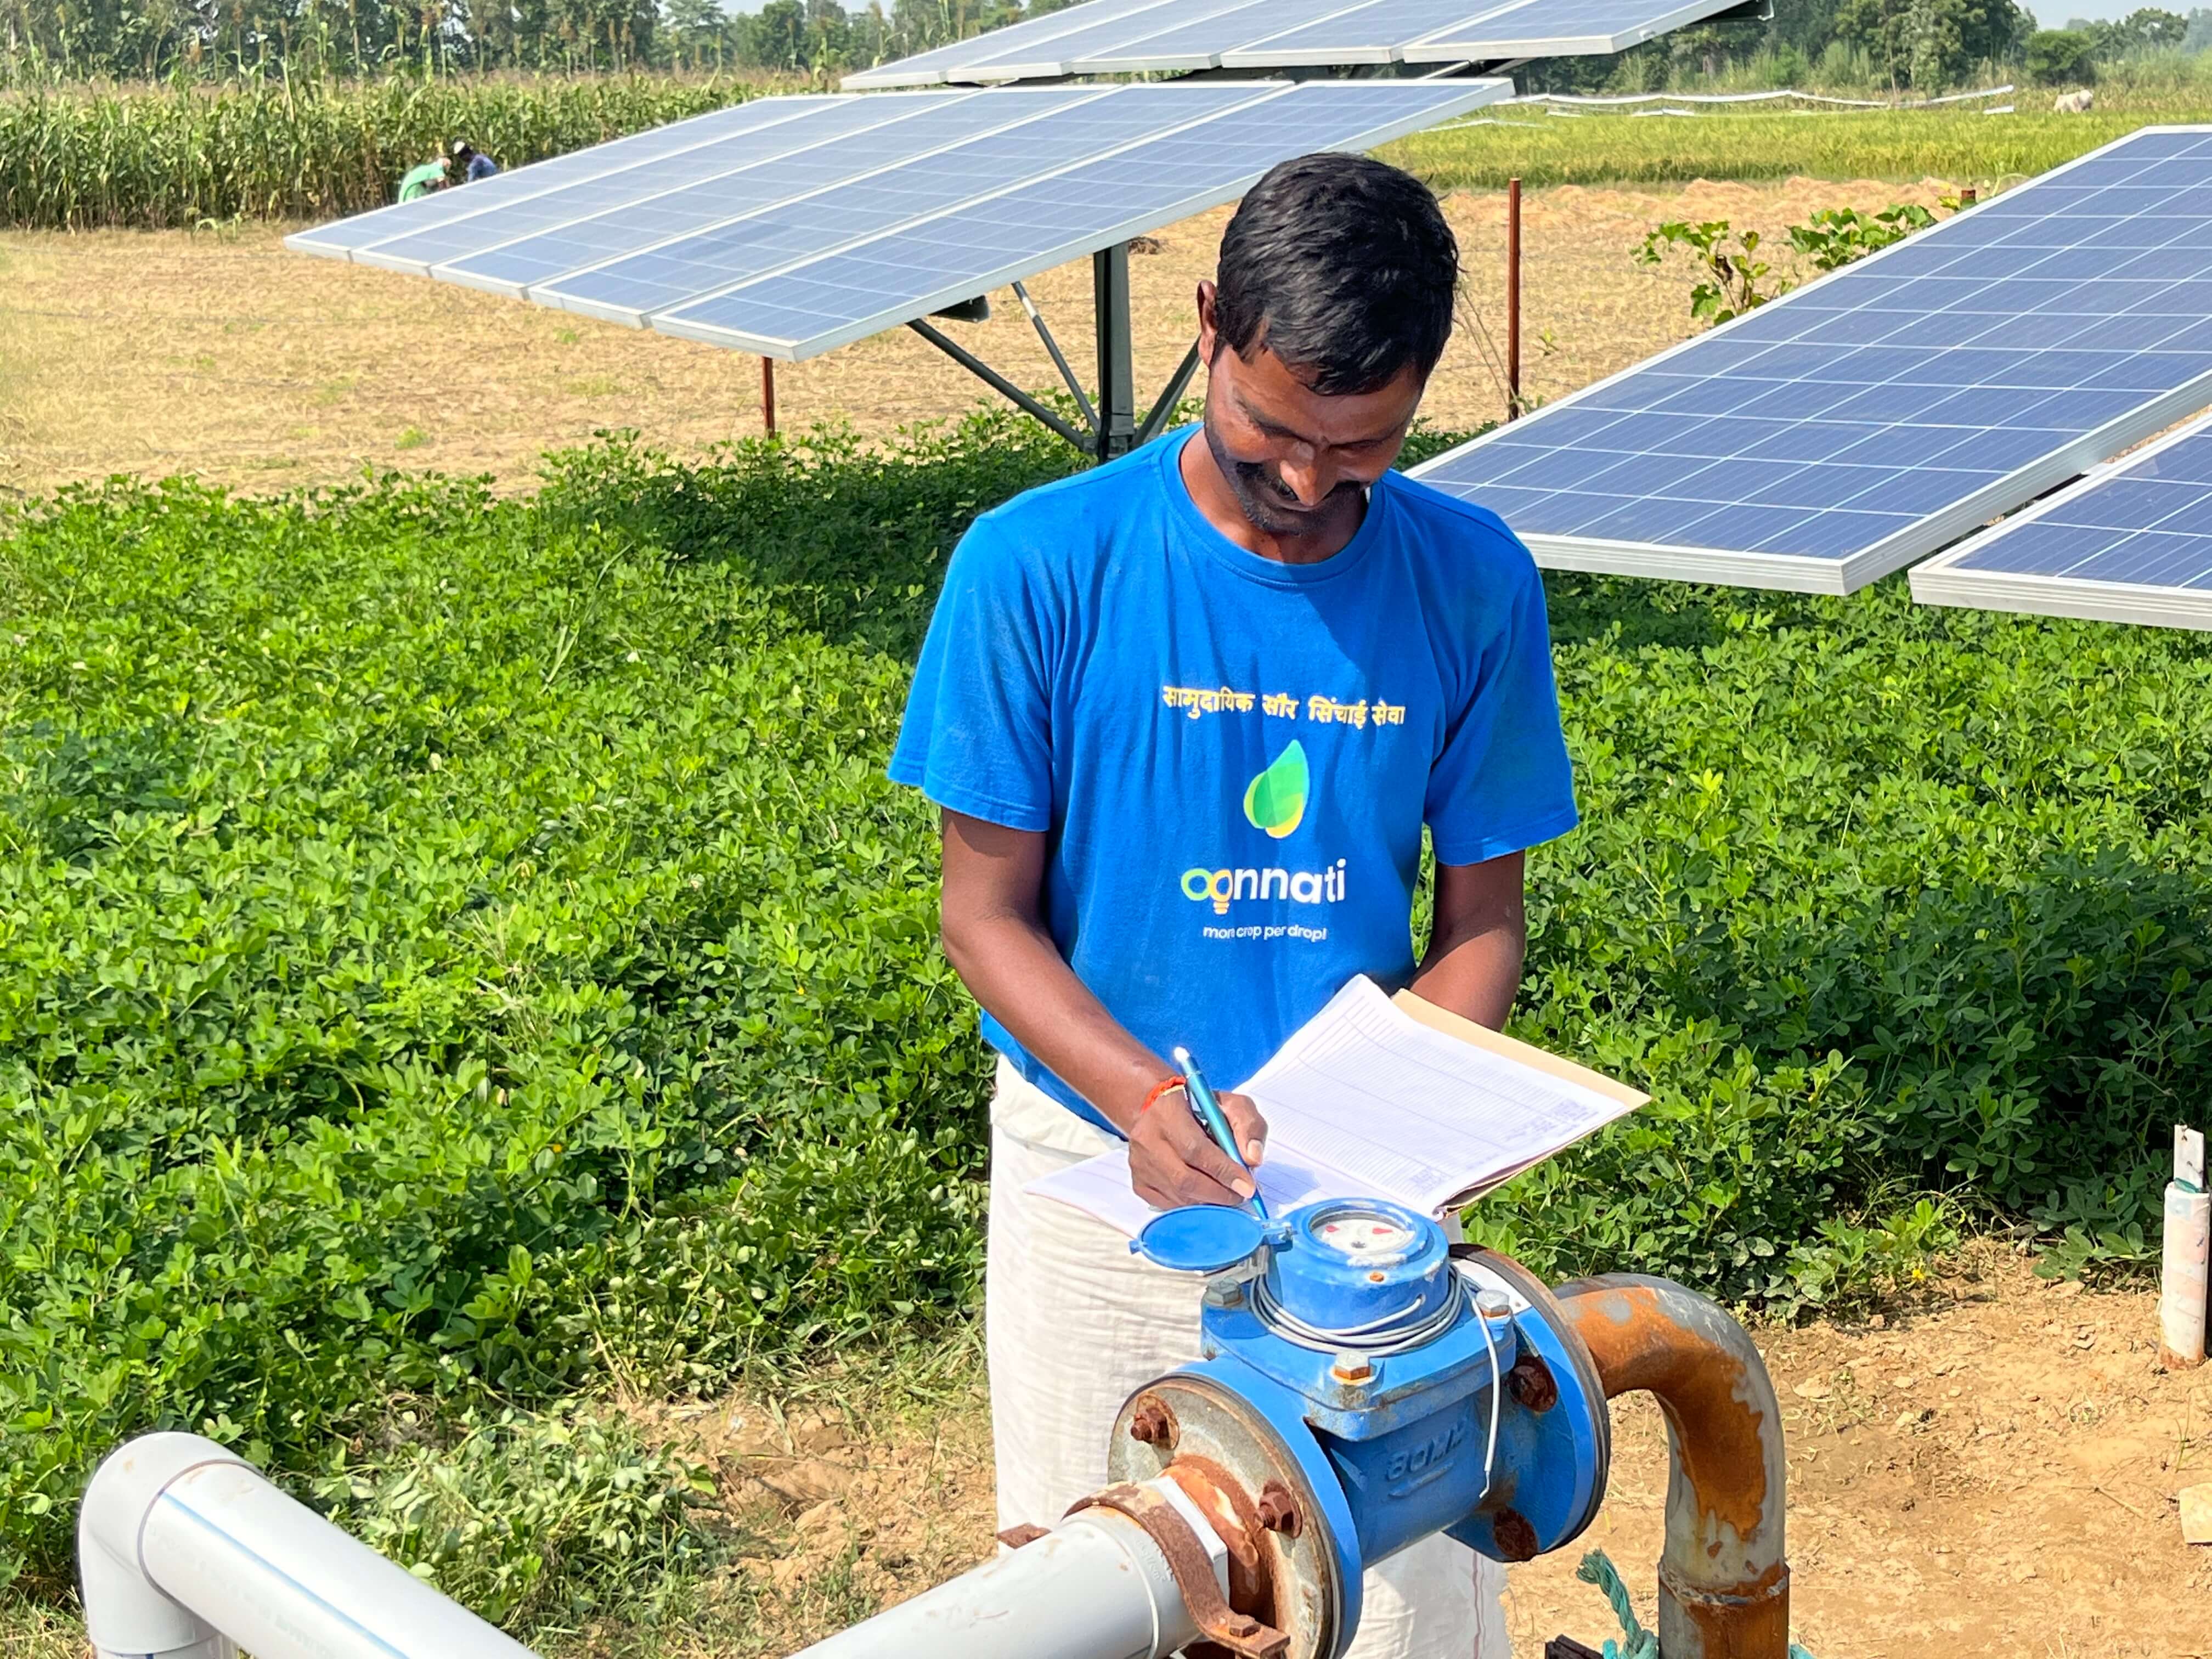 A solar pump operator at a solar Irrigation site. Operators are hired locally at the village level and trained to provide Pay-Per-Use services in their communities